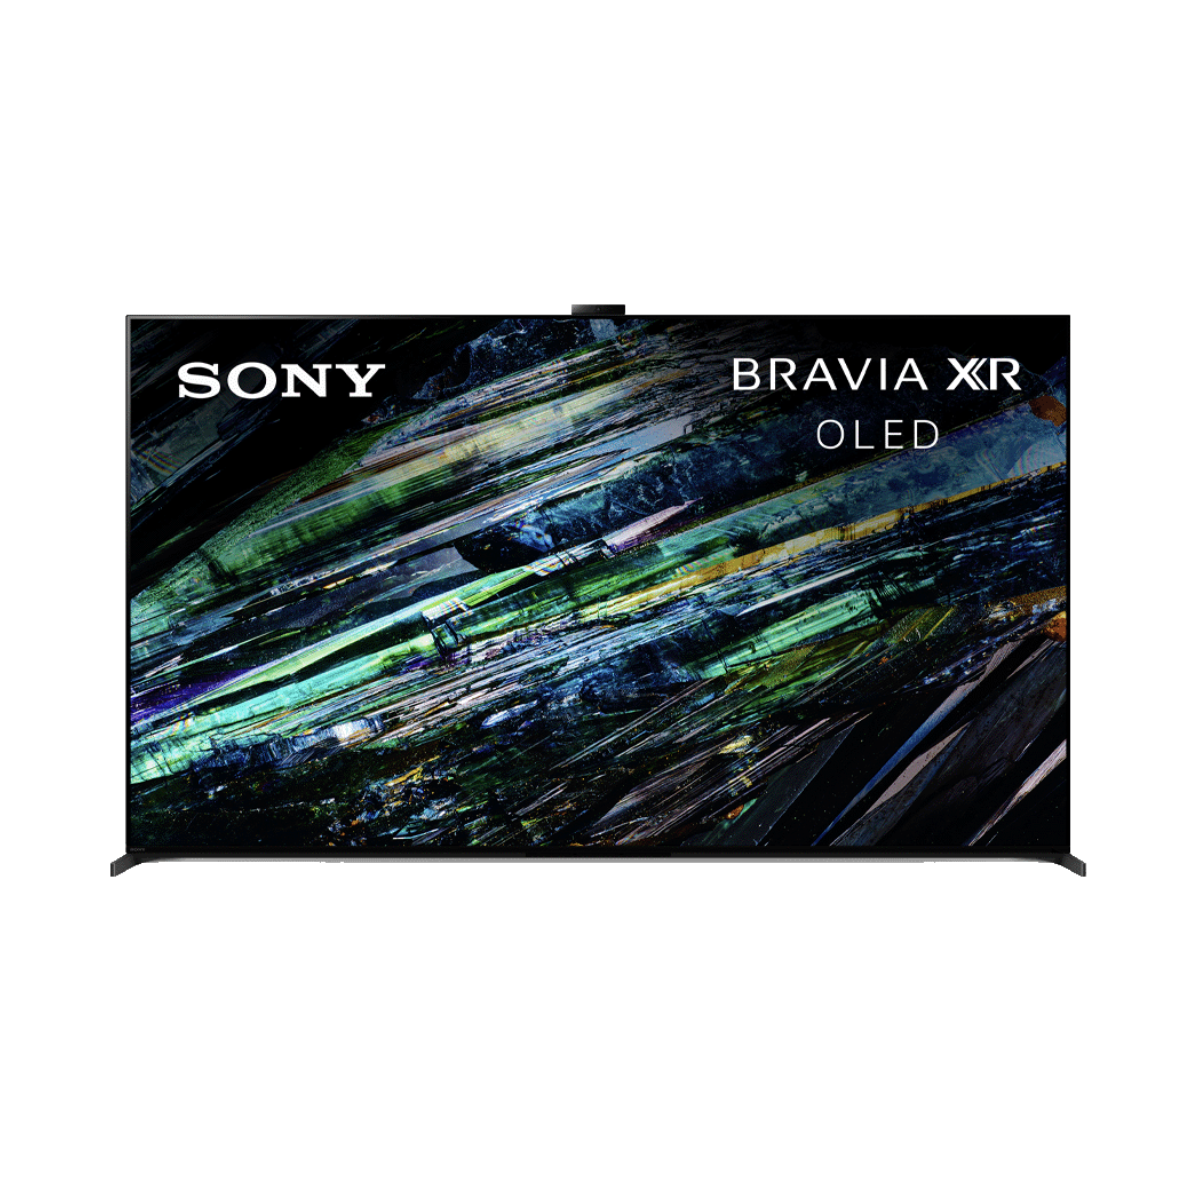 The Sony 65-inch XR A95L